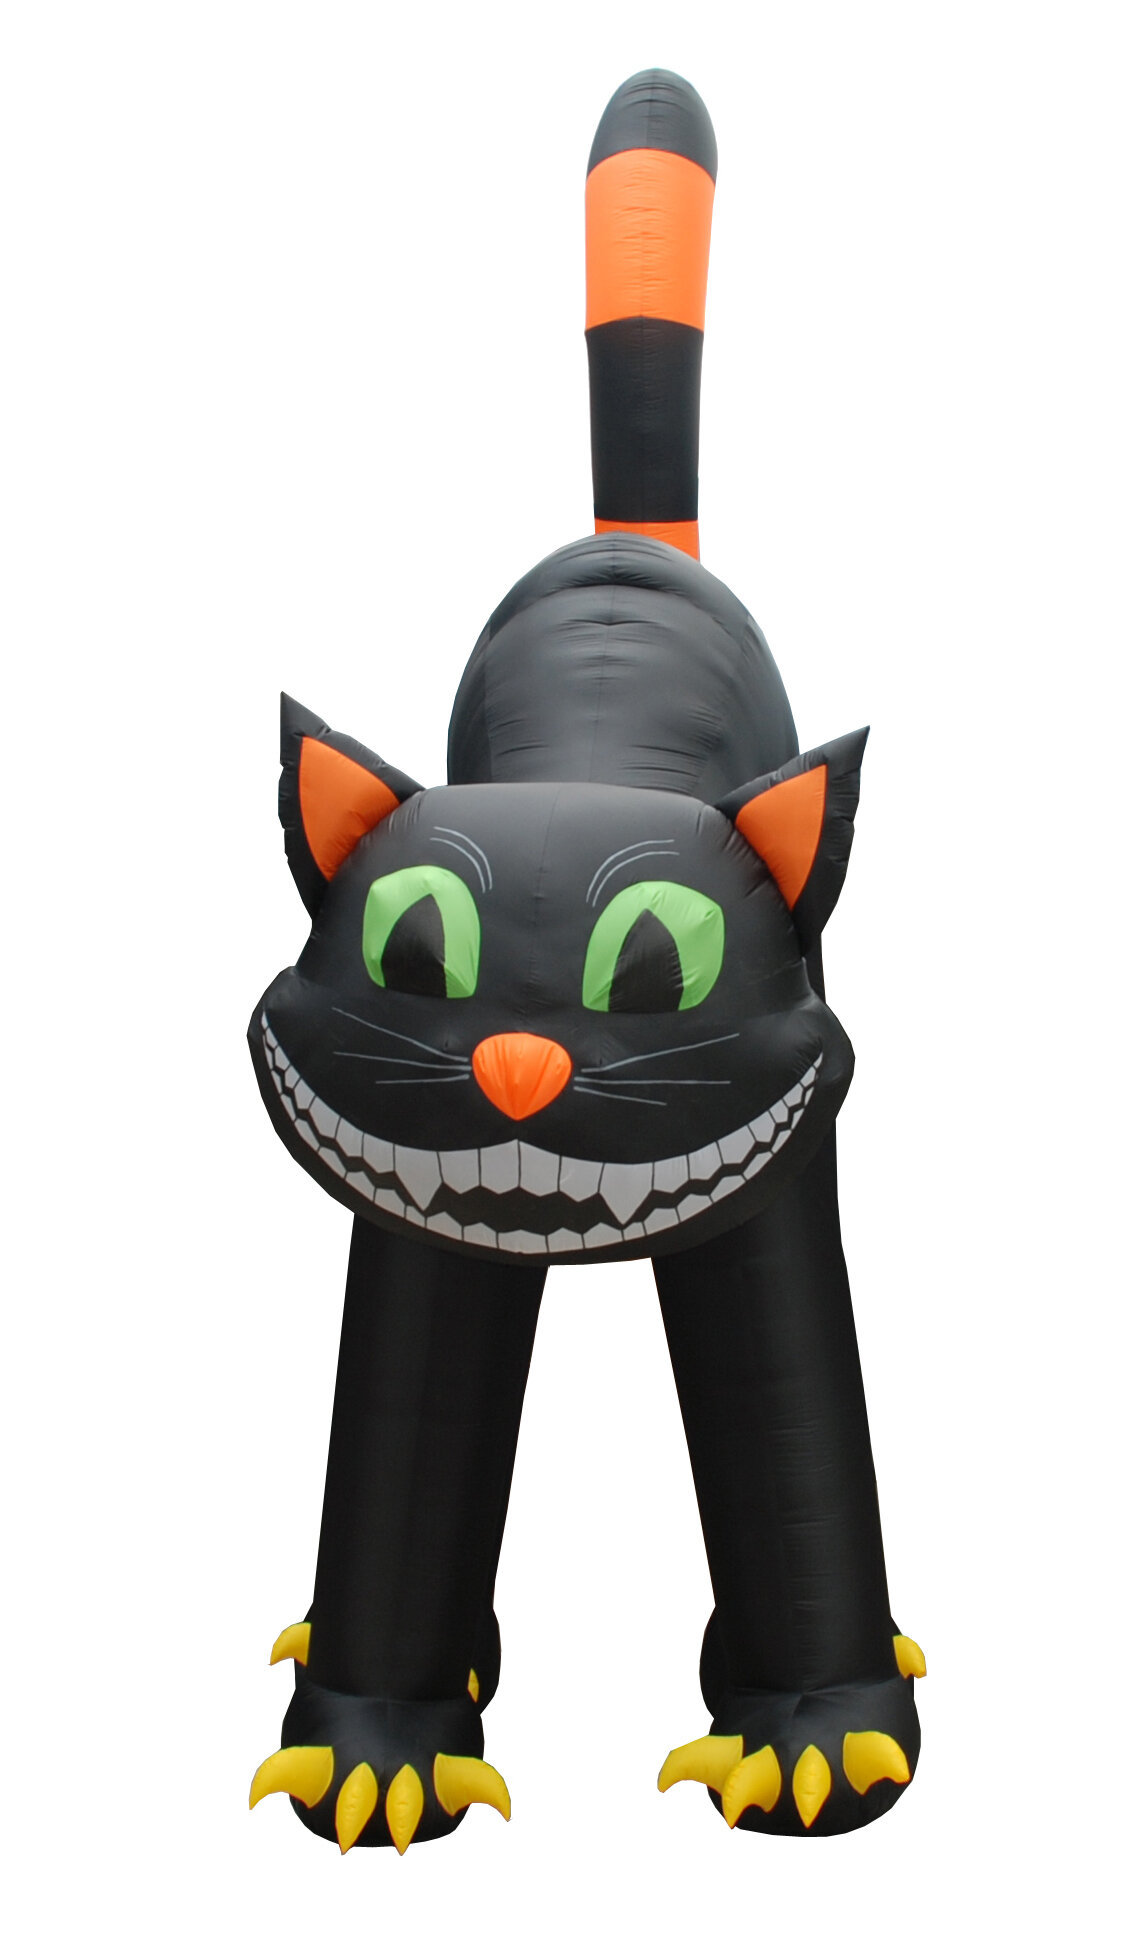 The Holiday Aisle® Halloween 20 Foot Tall Animated Giant Black Cat  Inflatable & Reviews | Wayfair